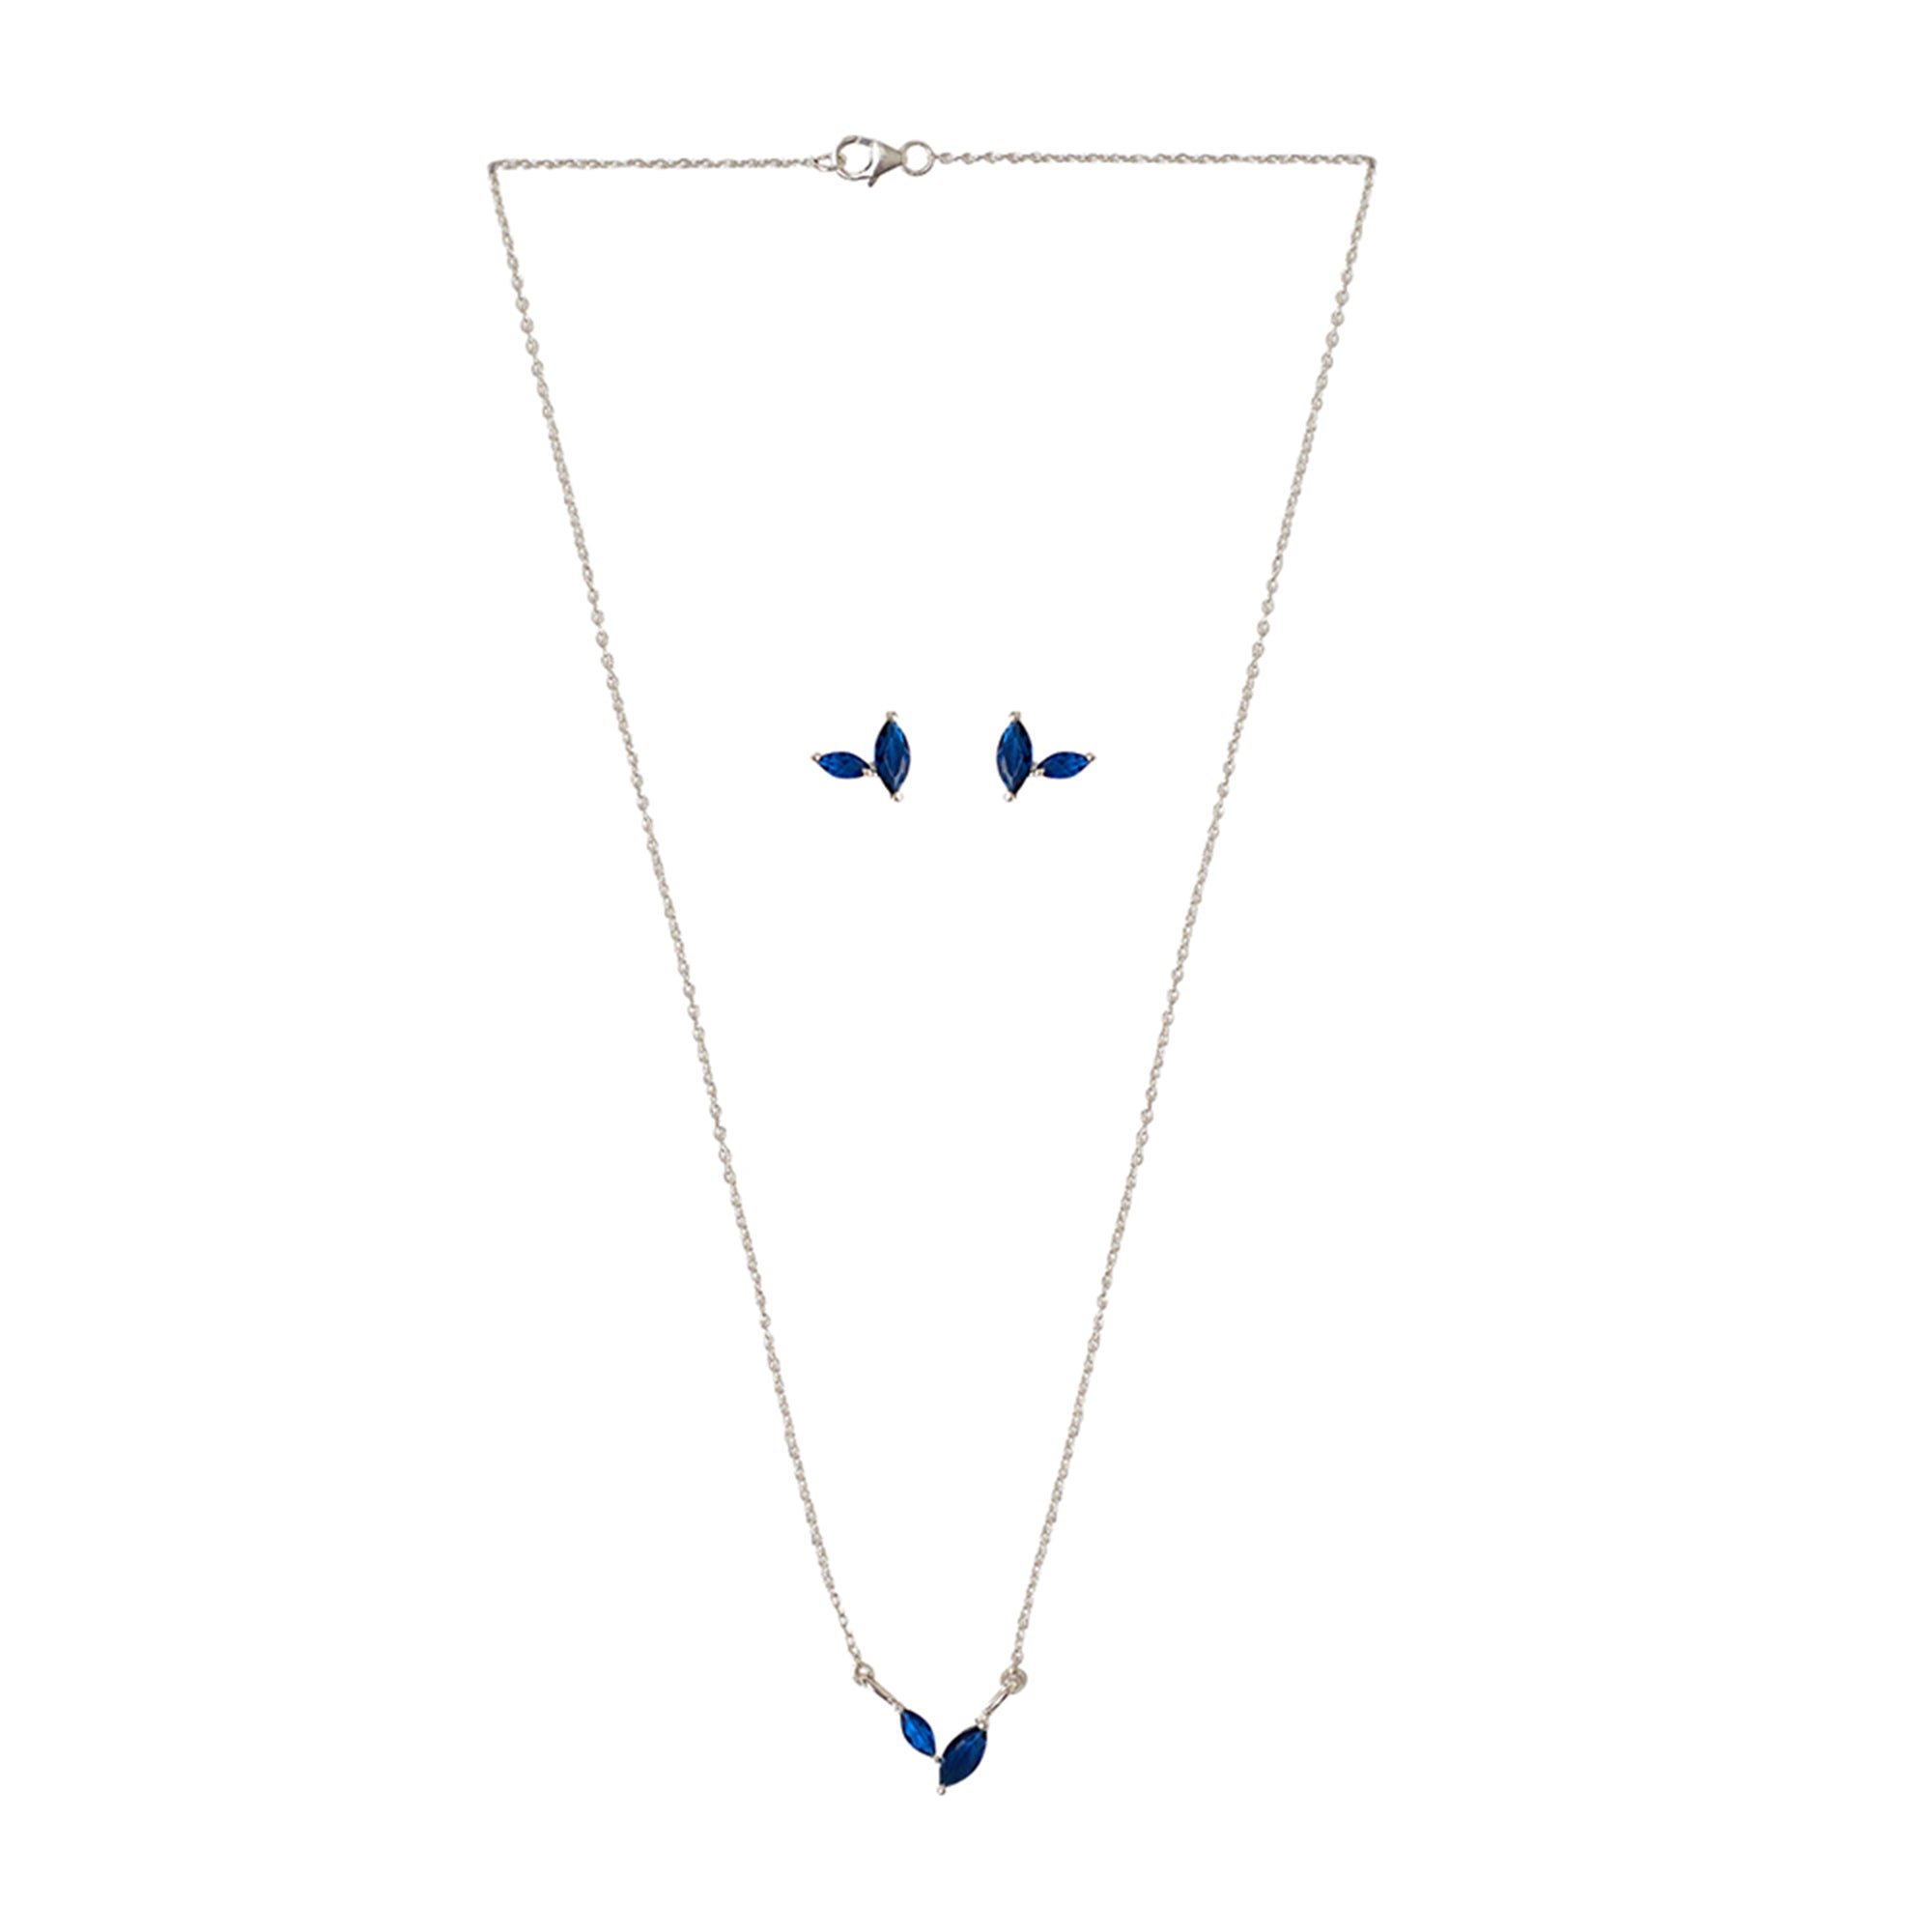 Women's Blue Marquise Cz Pendant Set And Stud Earrings In 925 Sterling Silver - Voylla